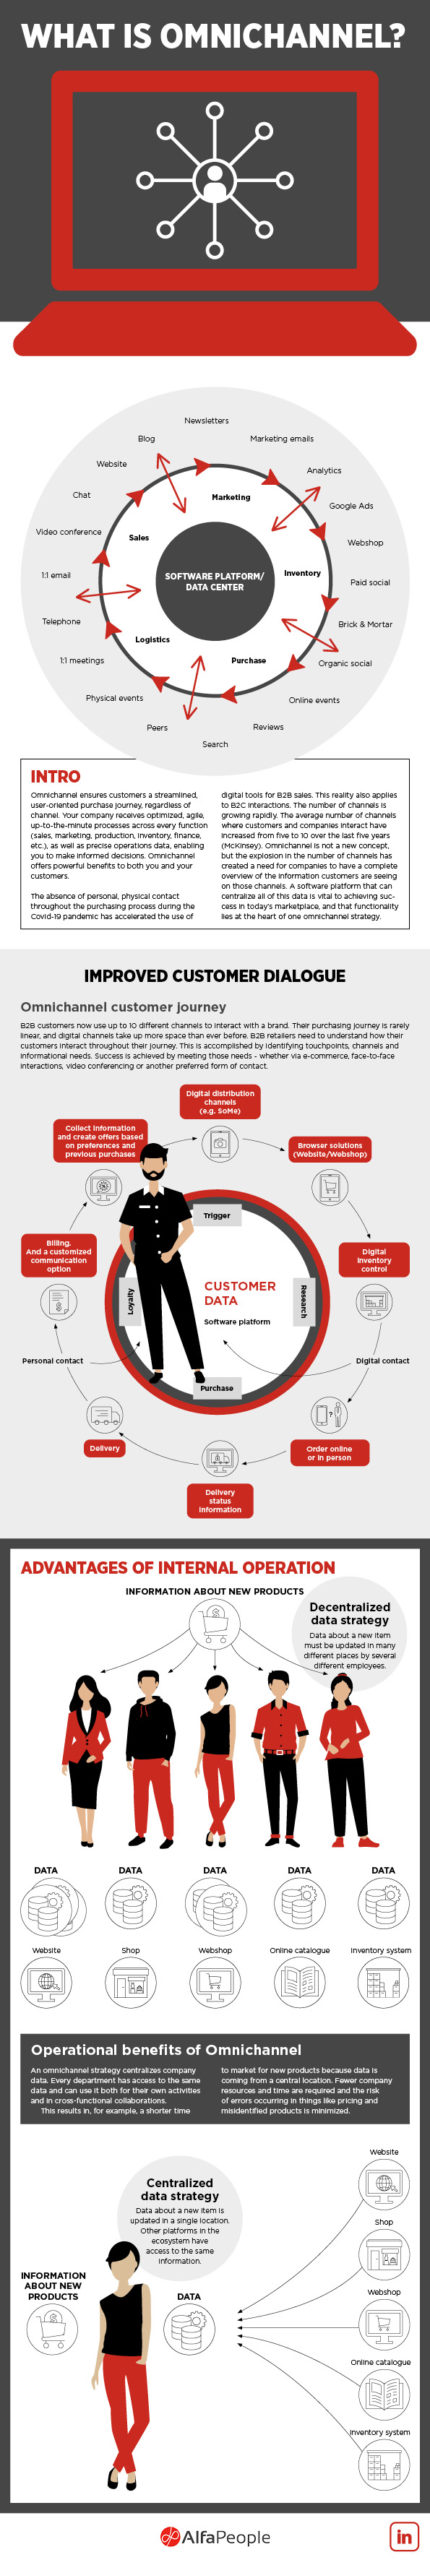 Infographic: What is omnichannel?